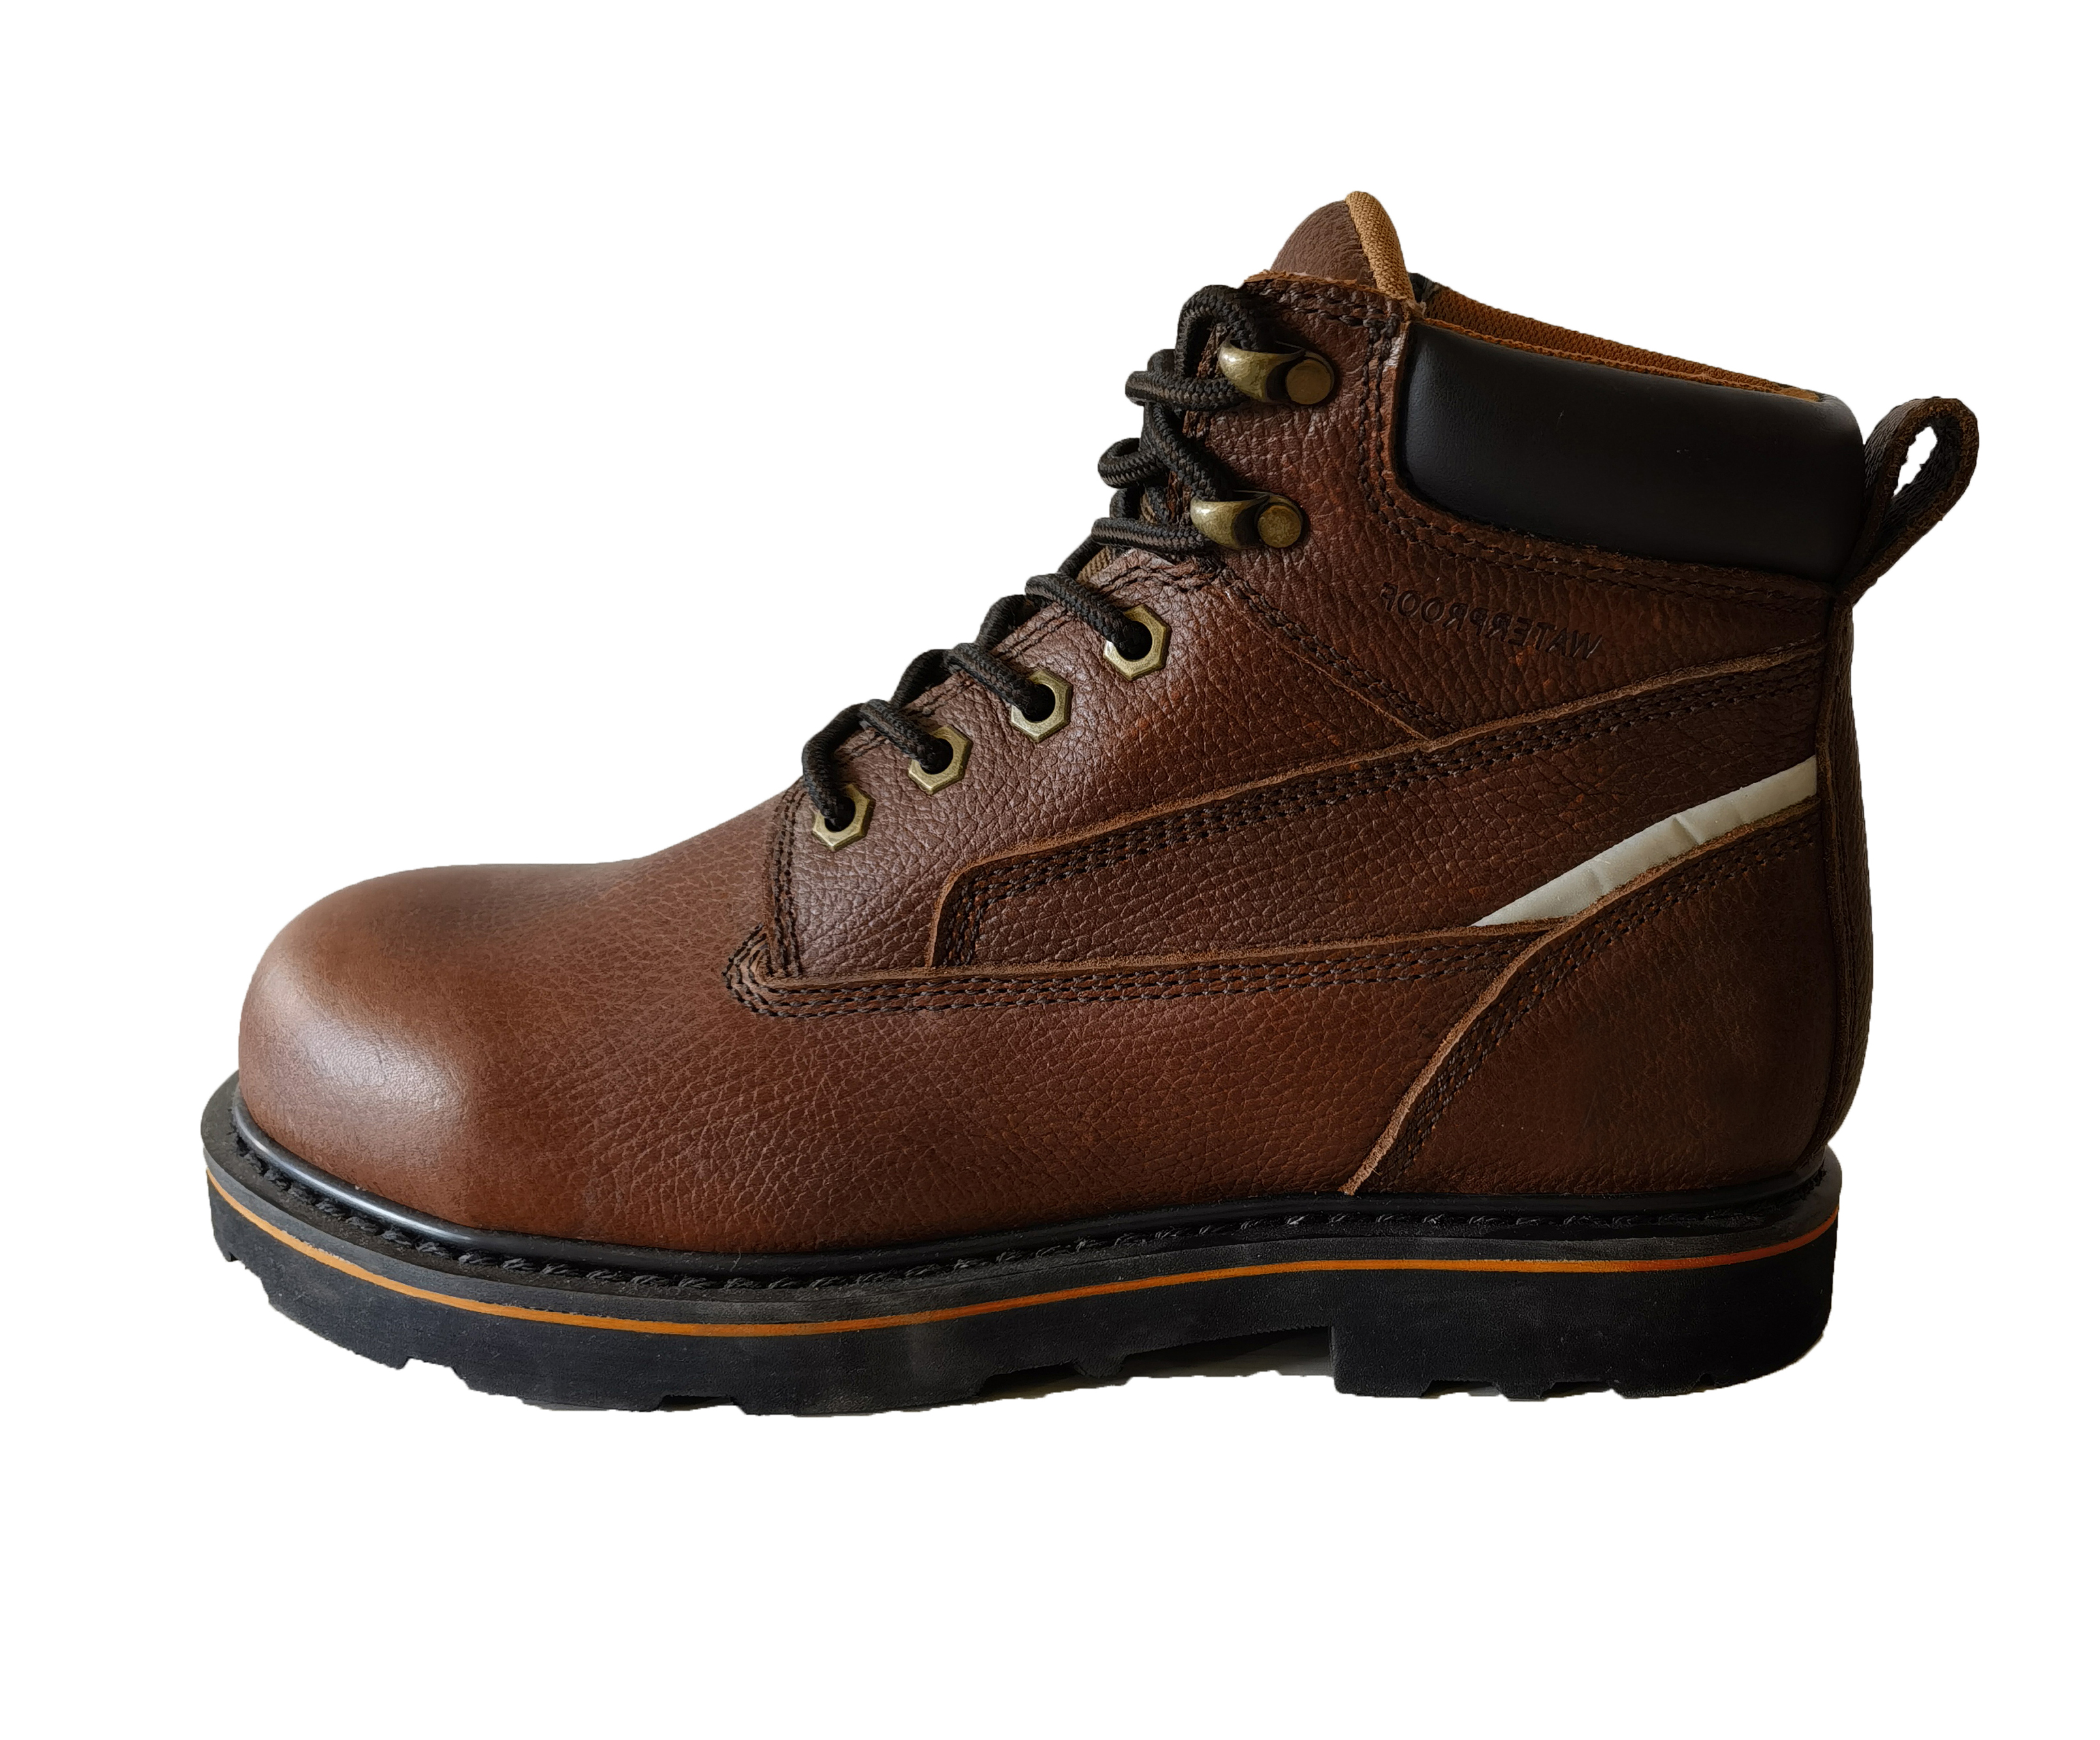 6 IN. Cherry BrowSoft Toe Water-resistant Work Boots